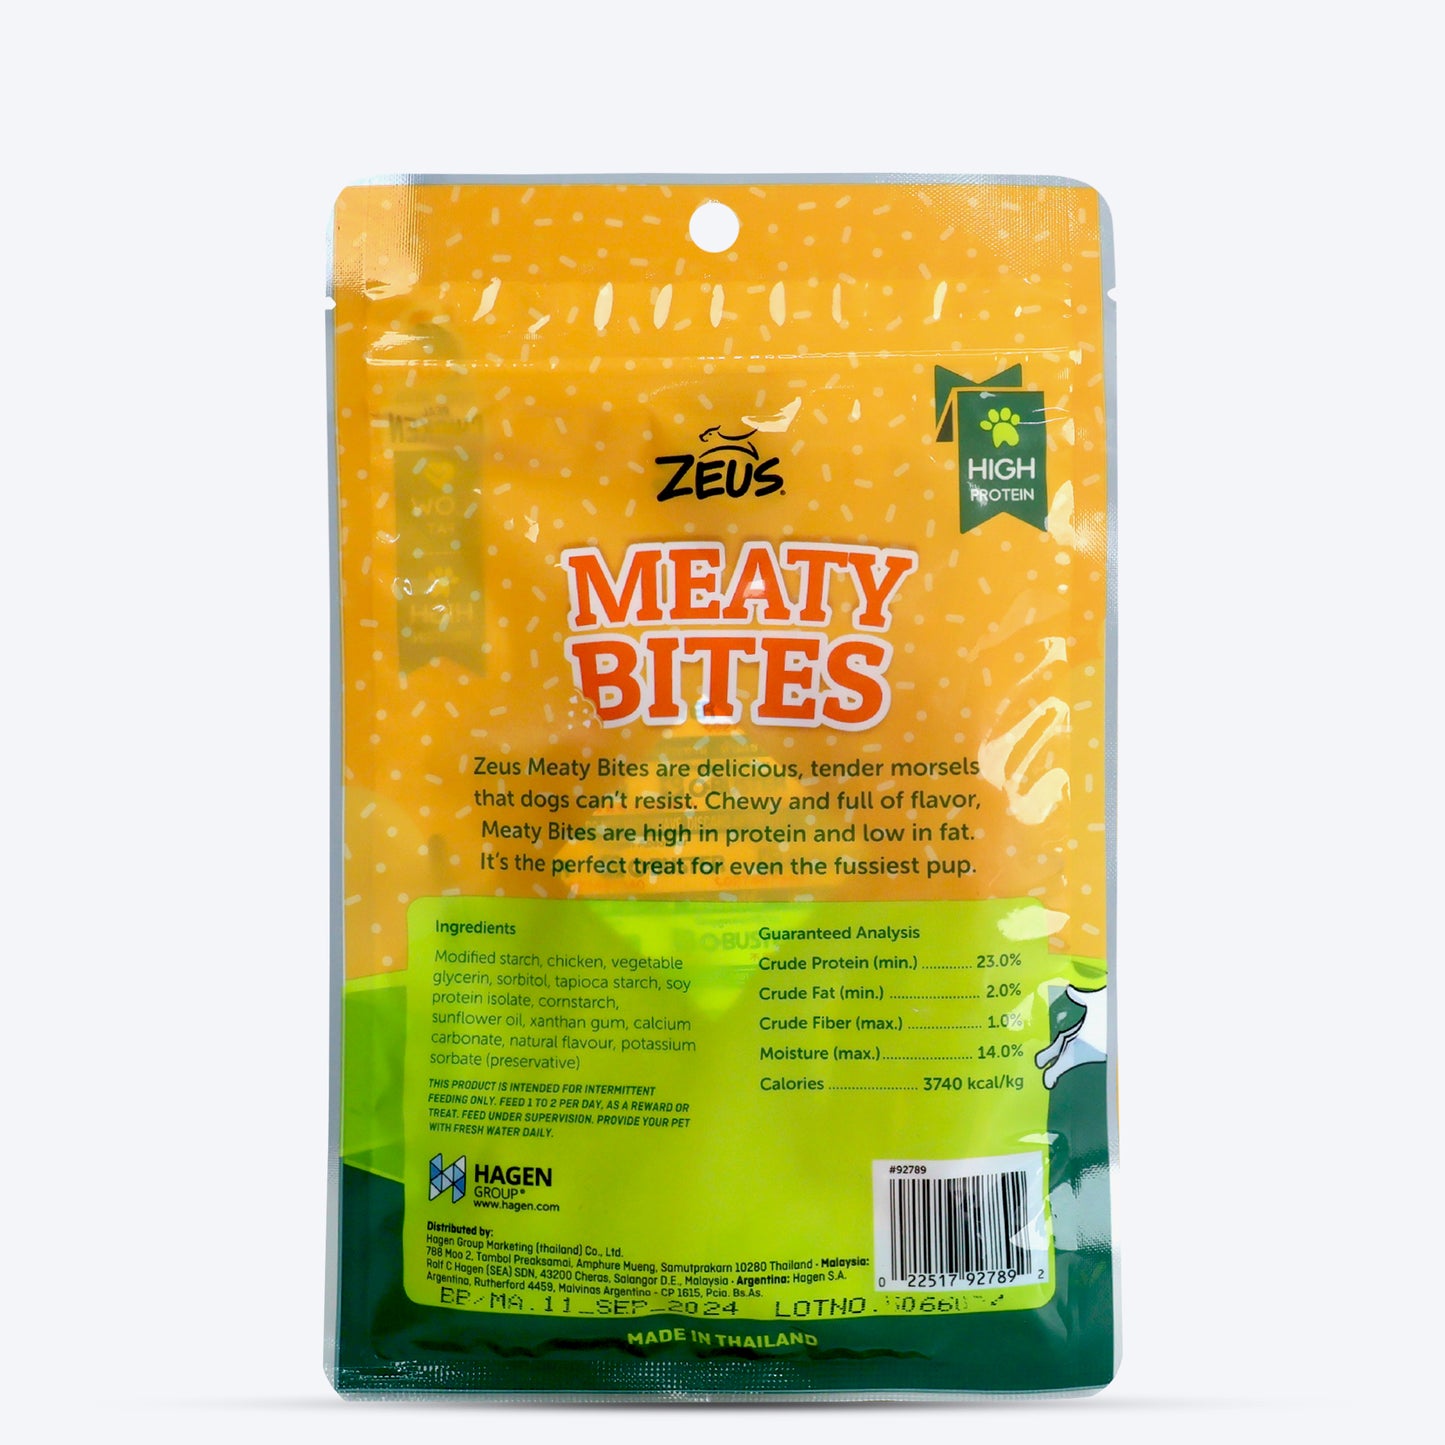 Zeus Meaty Bites Chicken With Twisted Stick Dog Treats - 60 gm - Heads Up For Tails